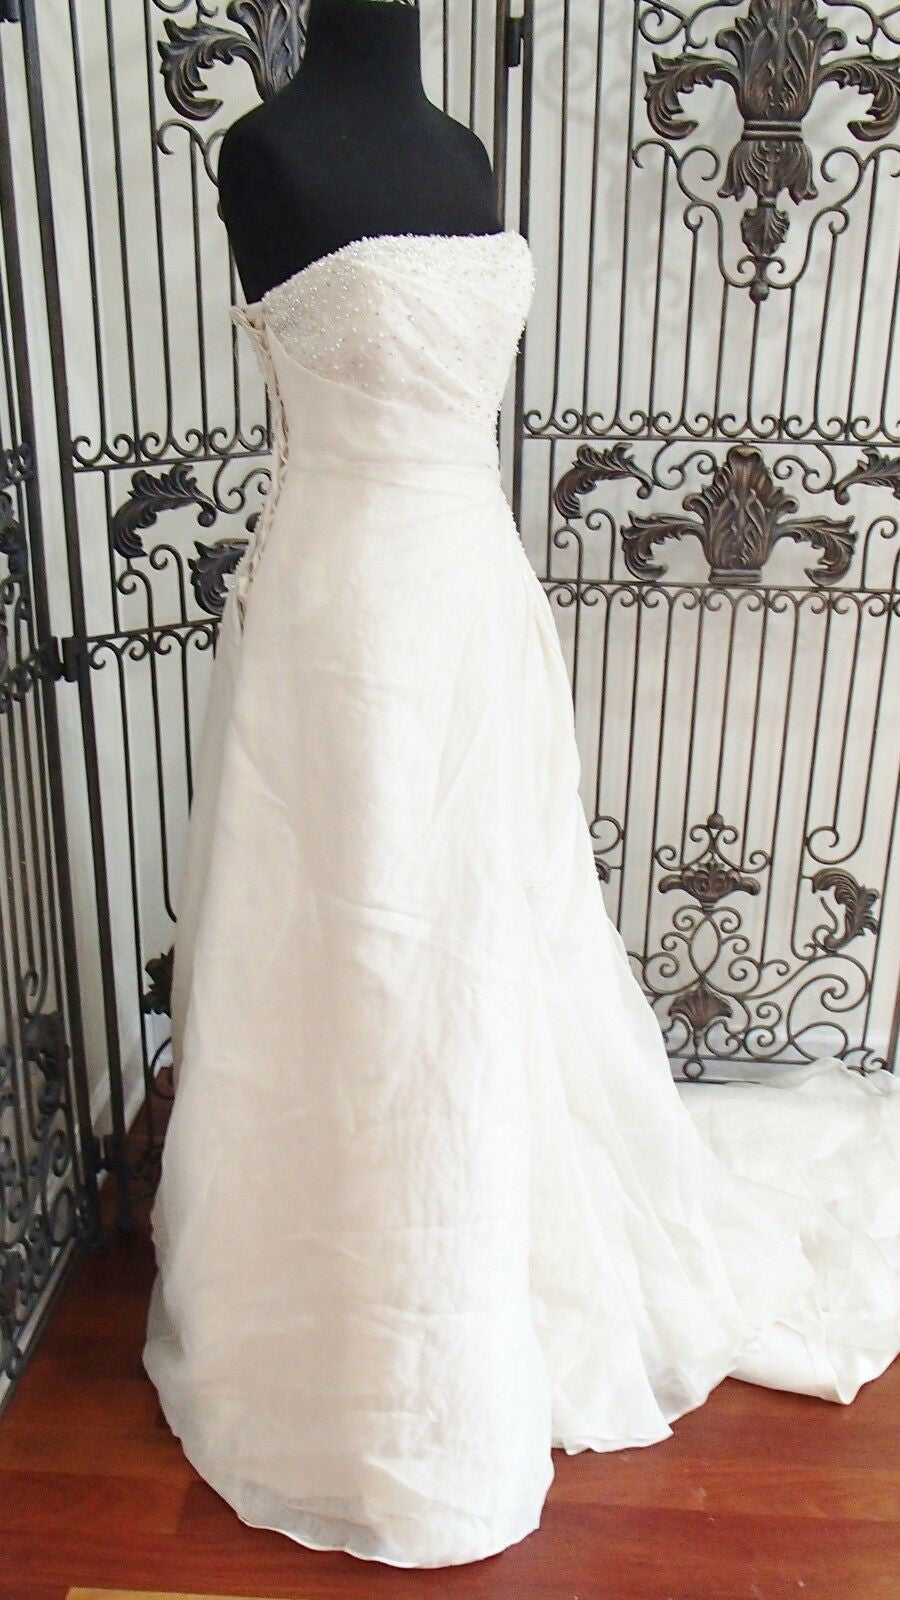 Maggie Sottero 'Haute Couture' wedding dress size-06 NEW